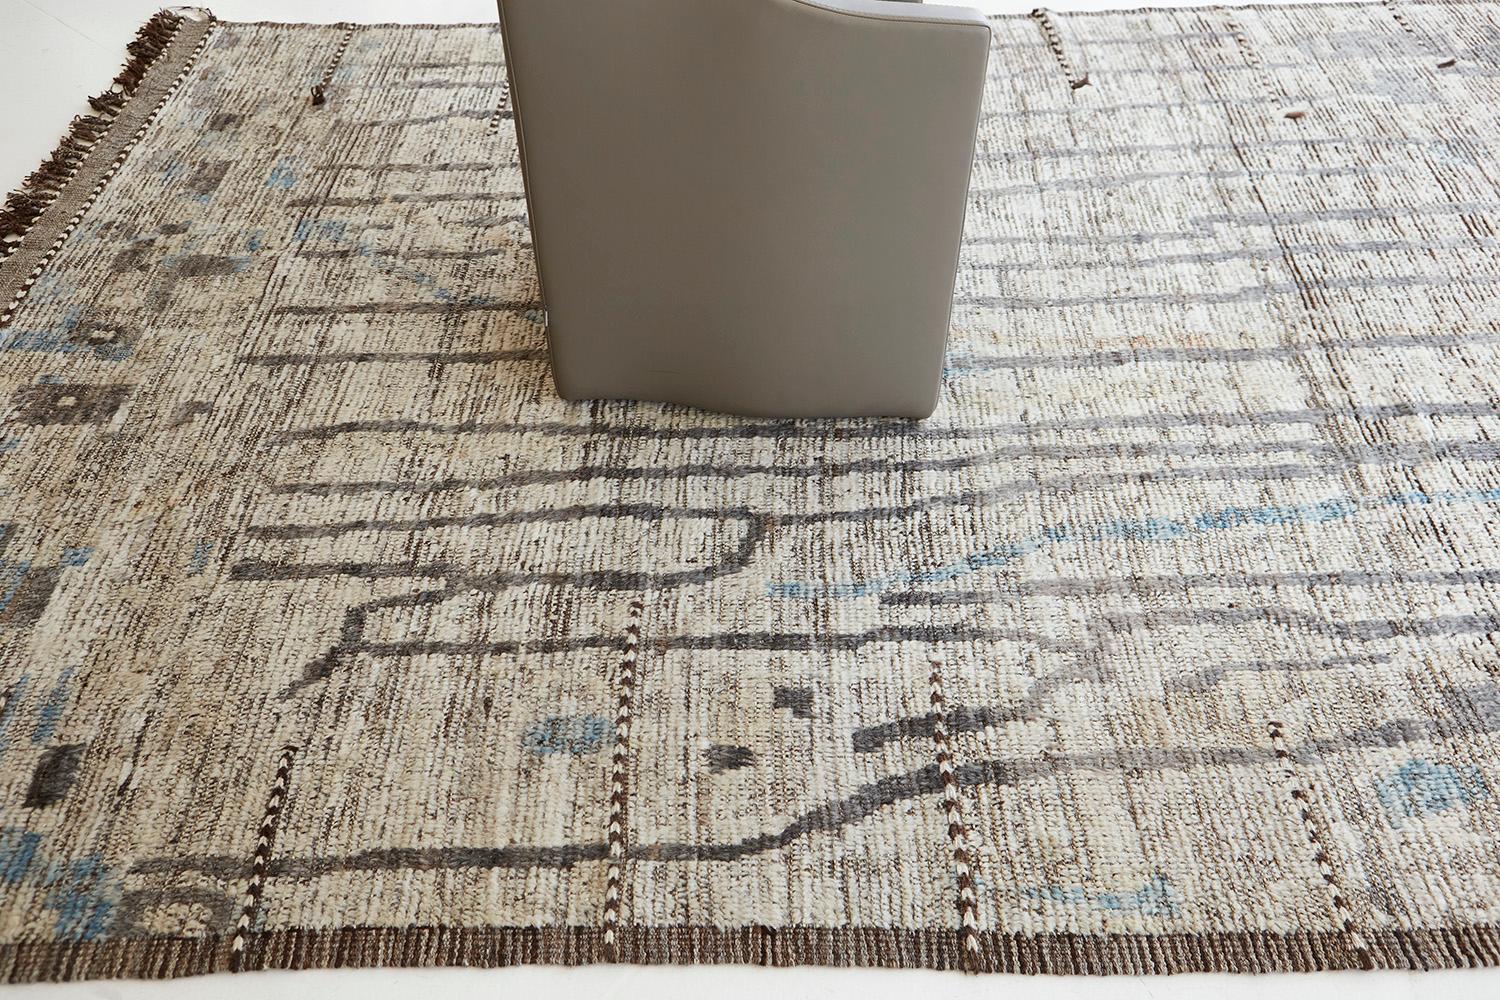 Berberis' is an interplay between natural earth tones and earthy colors into a modern-day interpretation of the Moroccan world. This rug's play of textures, linework, and unique shapes is what makes the atlas collection so unique and sought after.